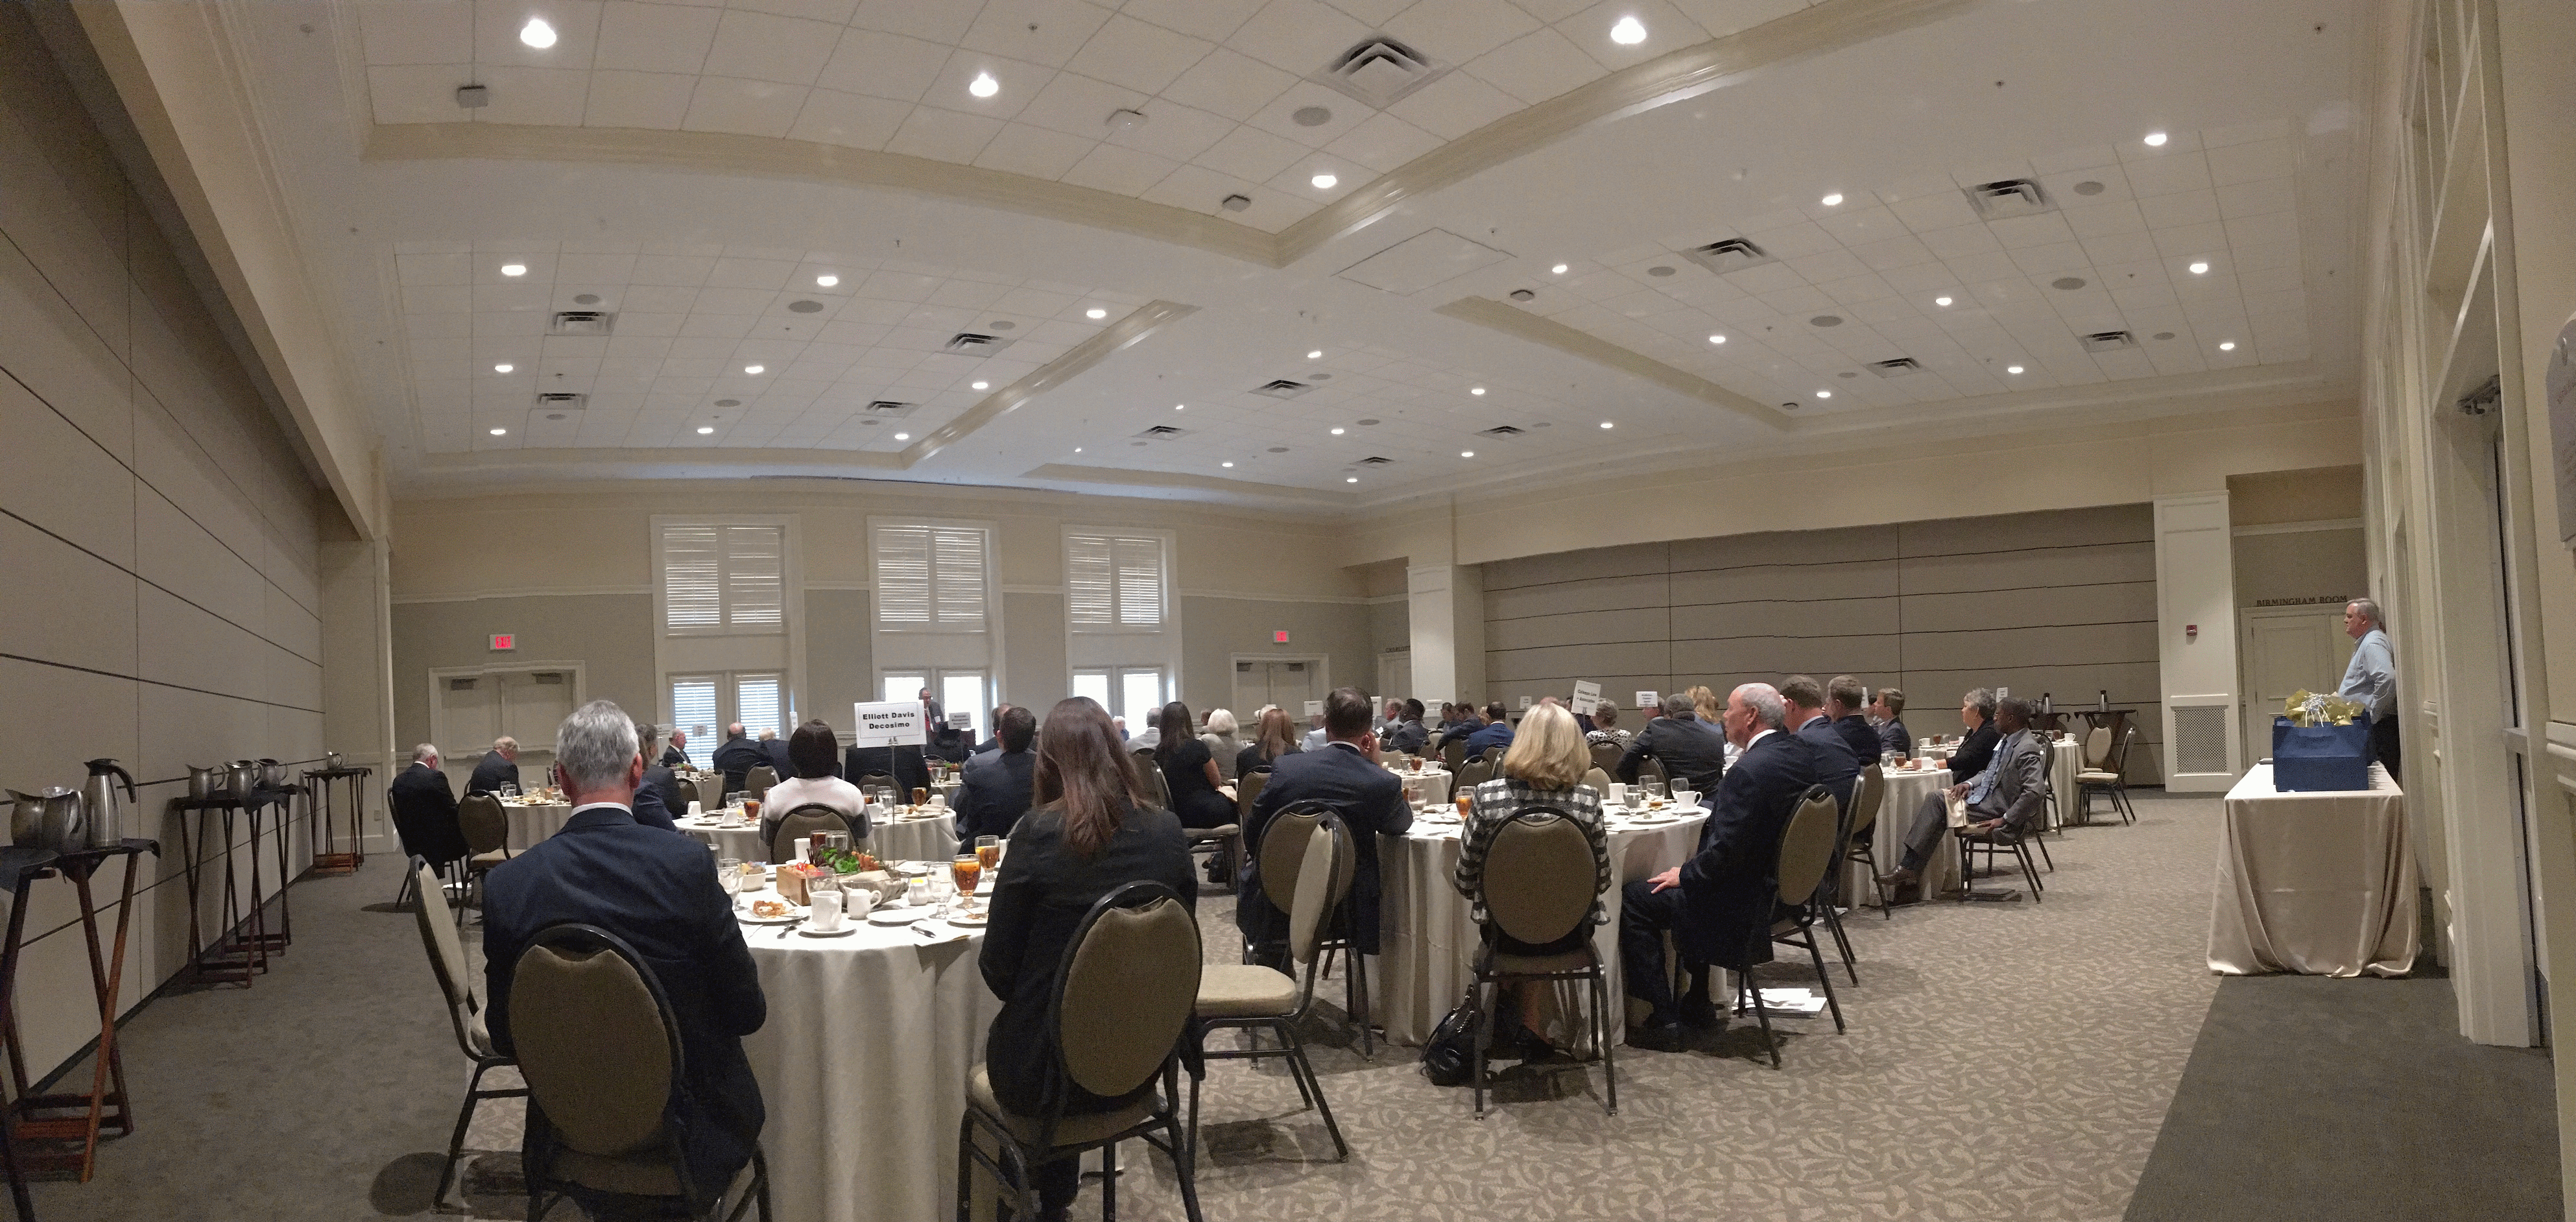 SCICU Board of Trustees Awards Luncheon (Younts Conference Center at Furman University, September 26, 2017)